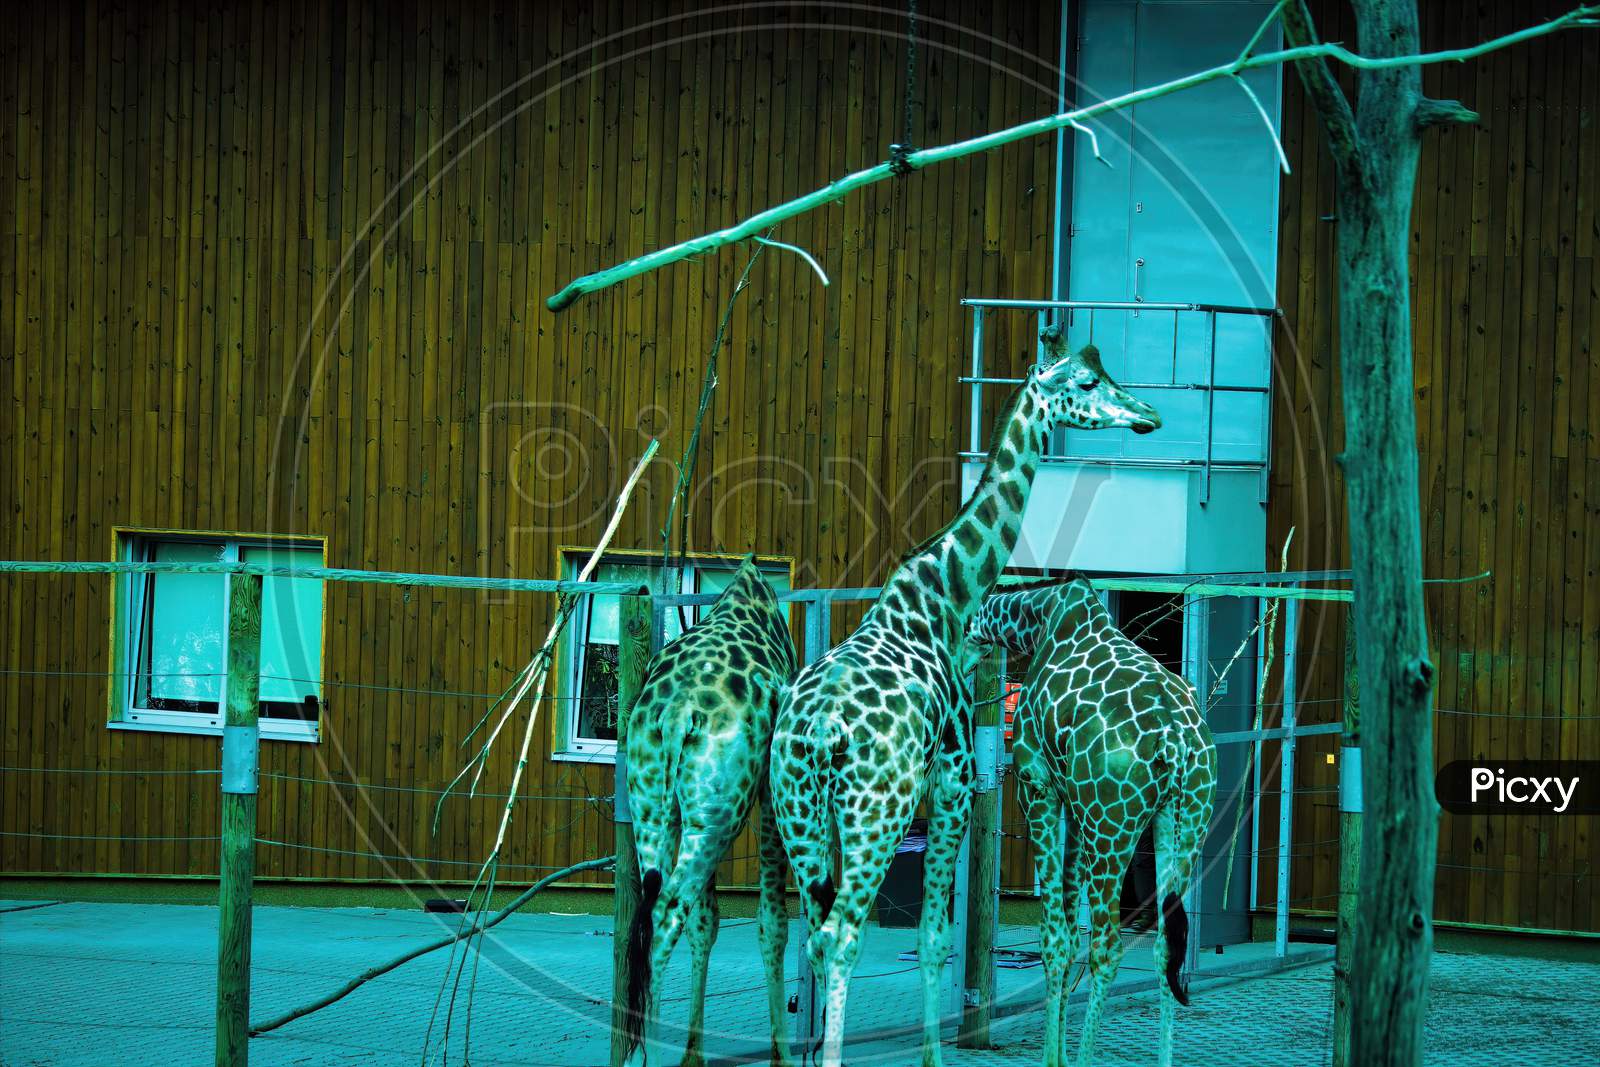 Krakow, Poland: Wide Angle Shot Of 3 Giraffe From Rear In The Zoo Located In Central Europe